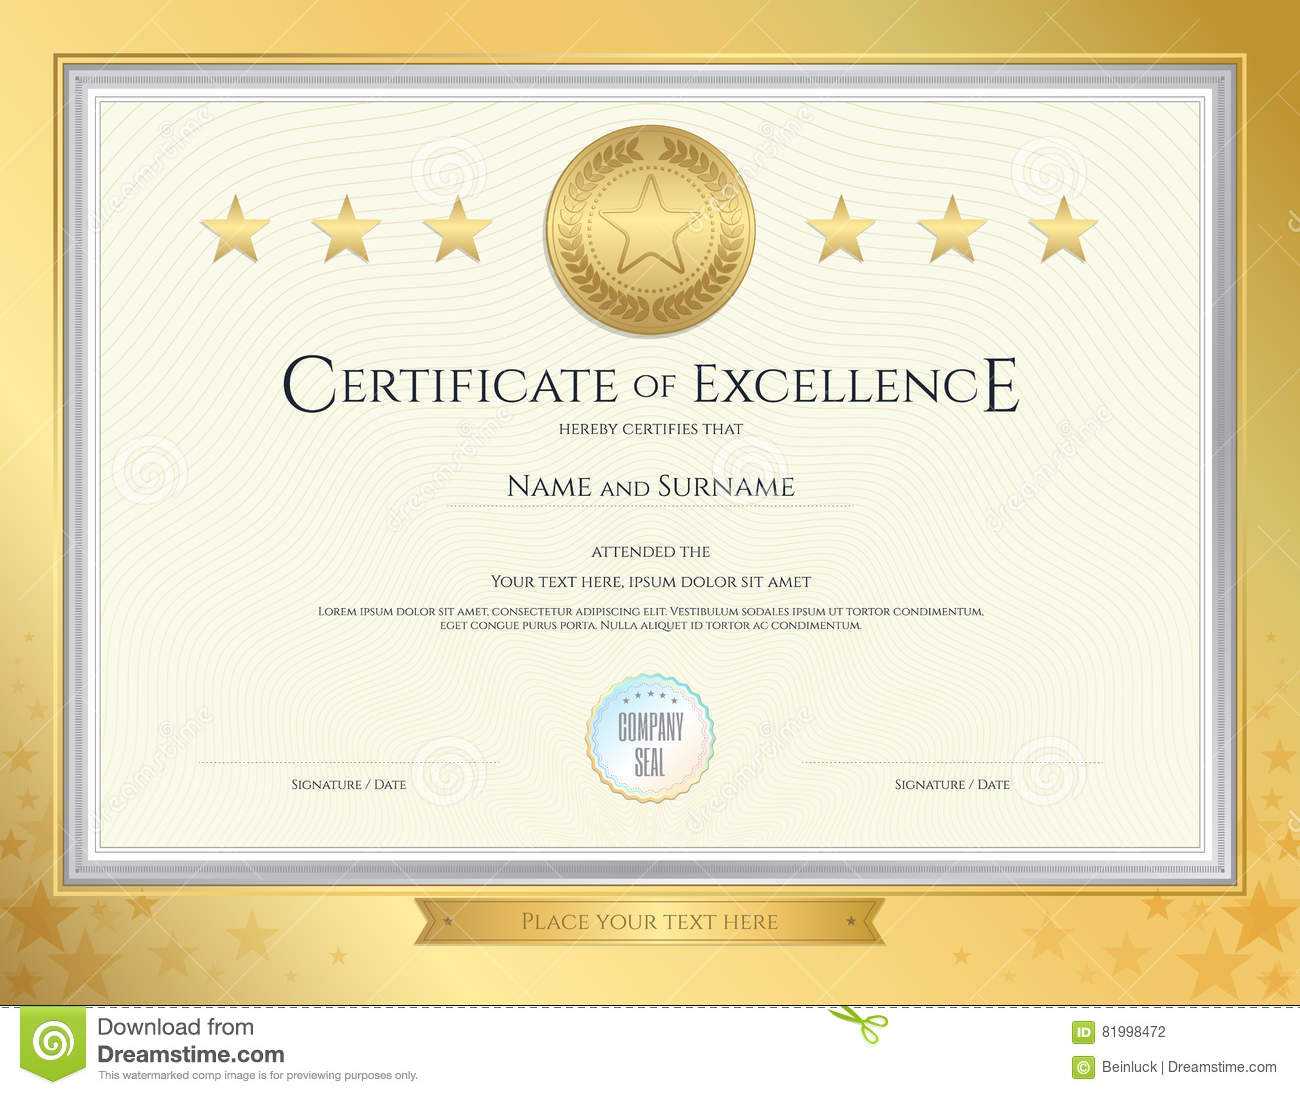 Elegant Certificate Template For Excellence, Achievement For Award Of Excellence Certificate Template